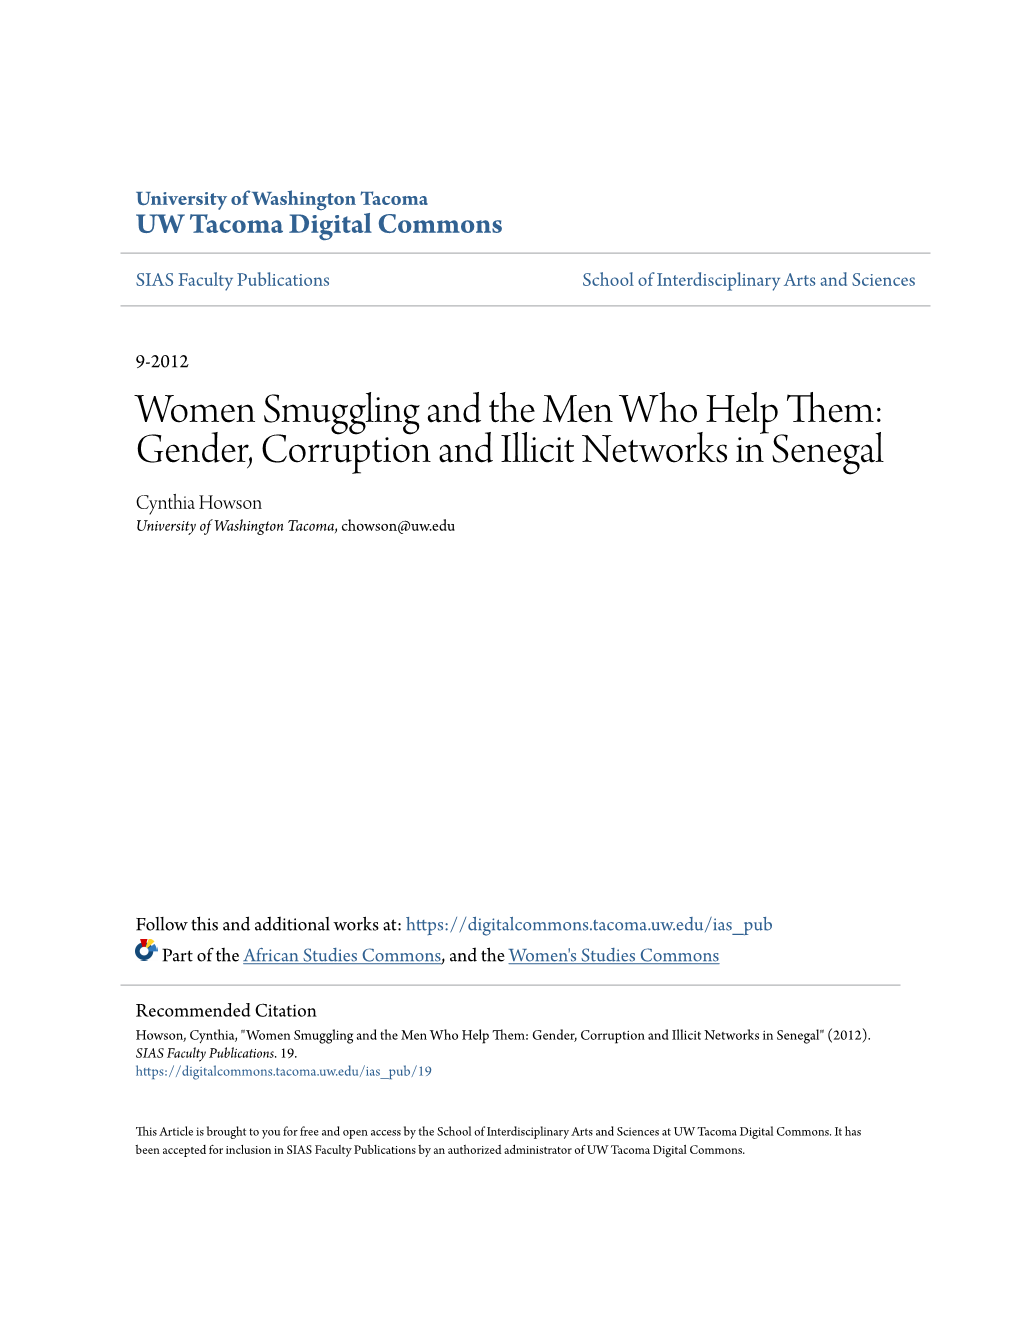 Women Smuggling and the Men Who Help Them: Gender, Corruption and Illicit Networks in Senegal Cynthia Howson University of Washington Tacoma, Chowson@Uw.Edu